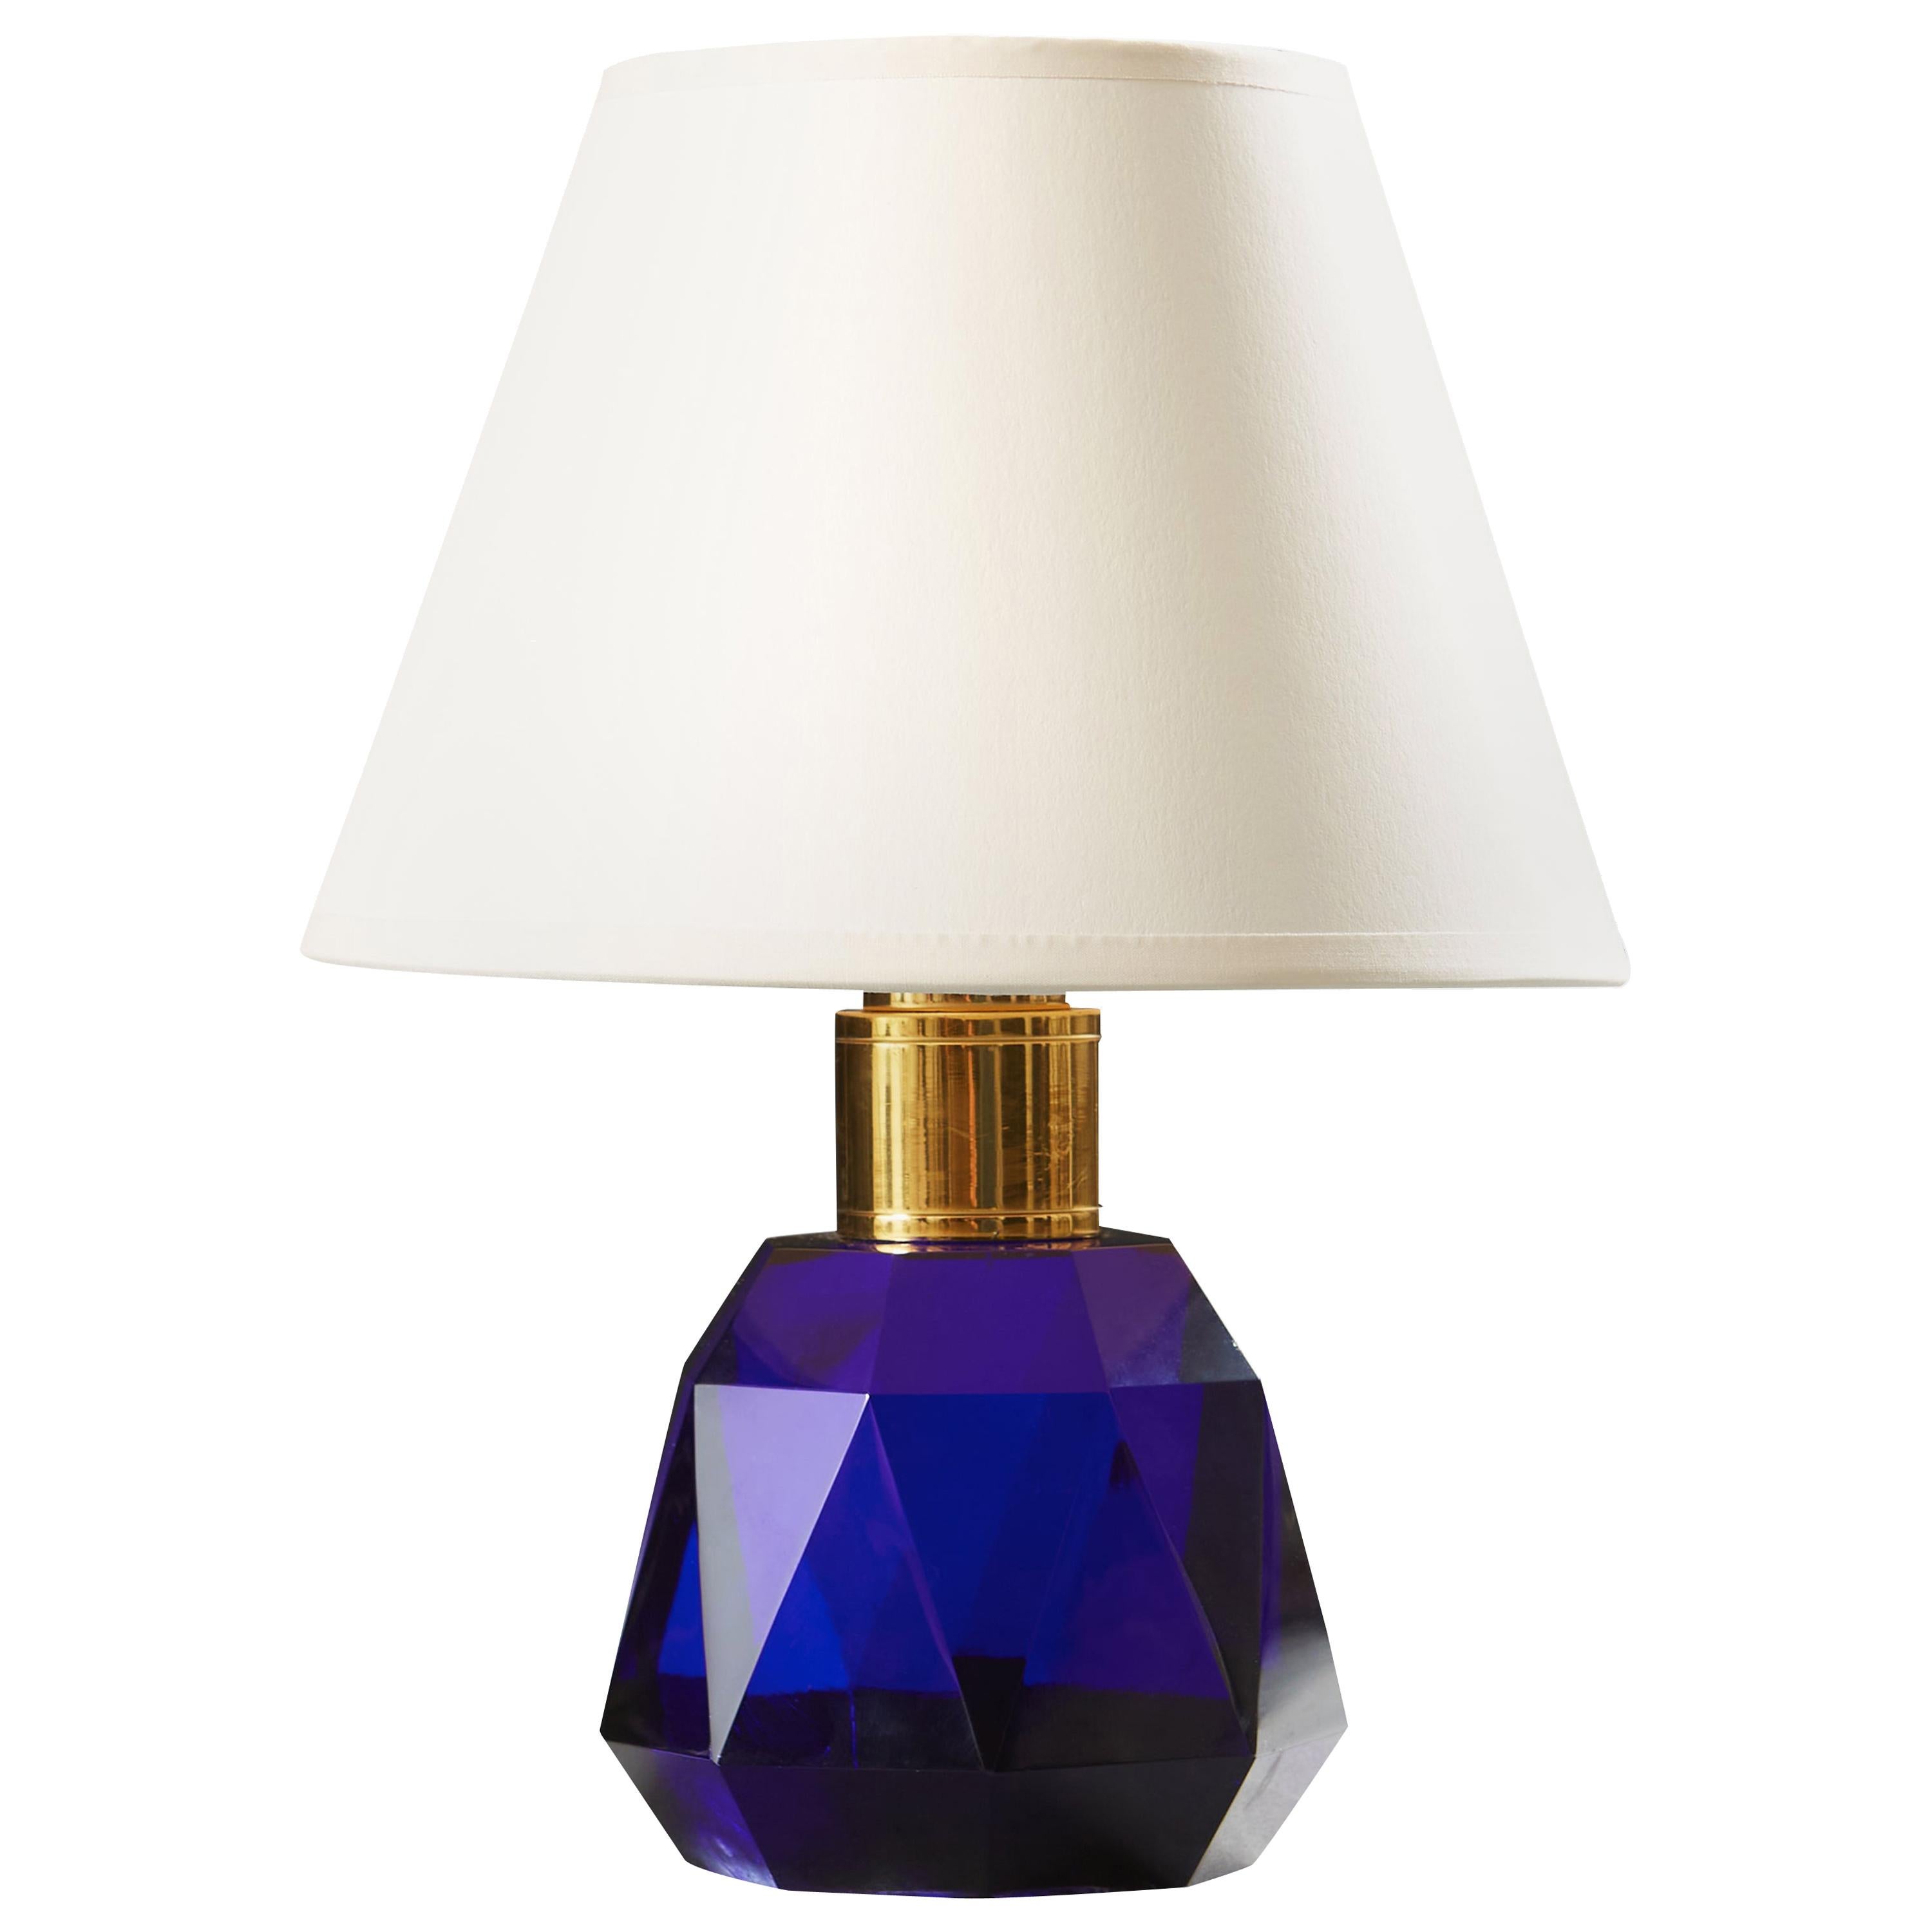 Small Imperial Blue Cut Glass Table Lamp For Sale